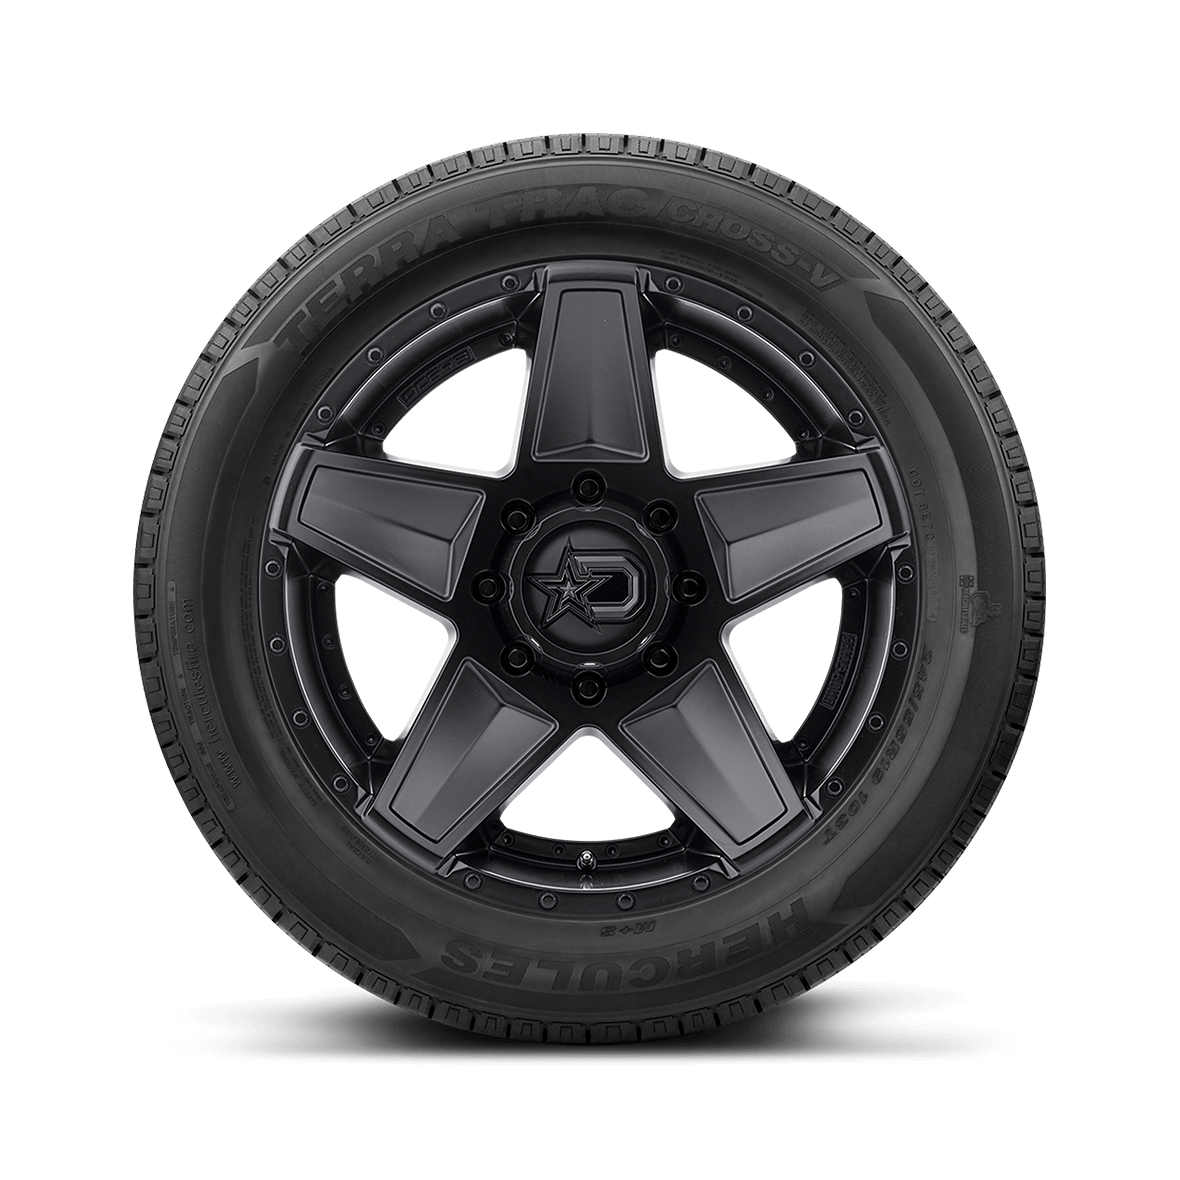 Straight on view of the Terra Trac Cross-V Light Truck sidewall design and rim on a white background.